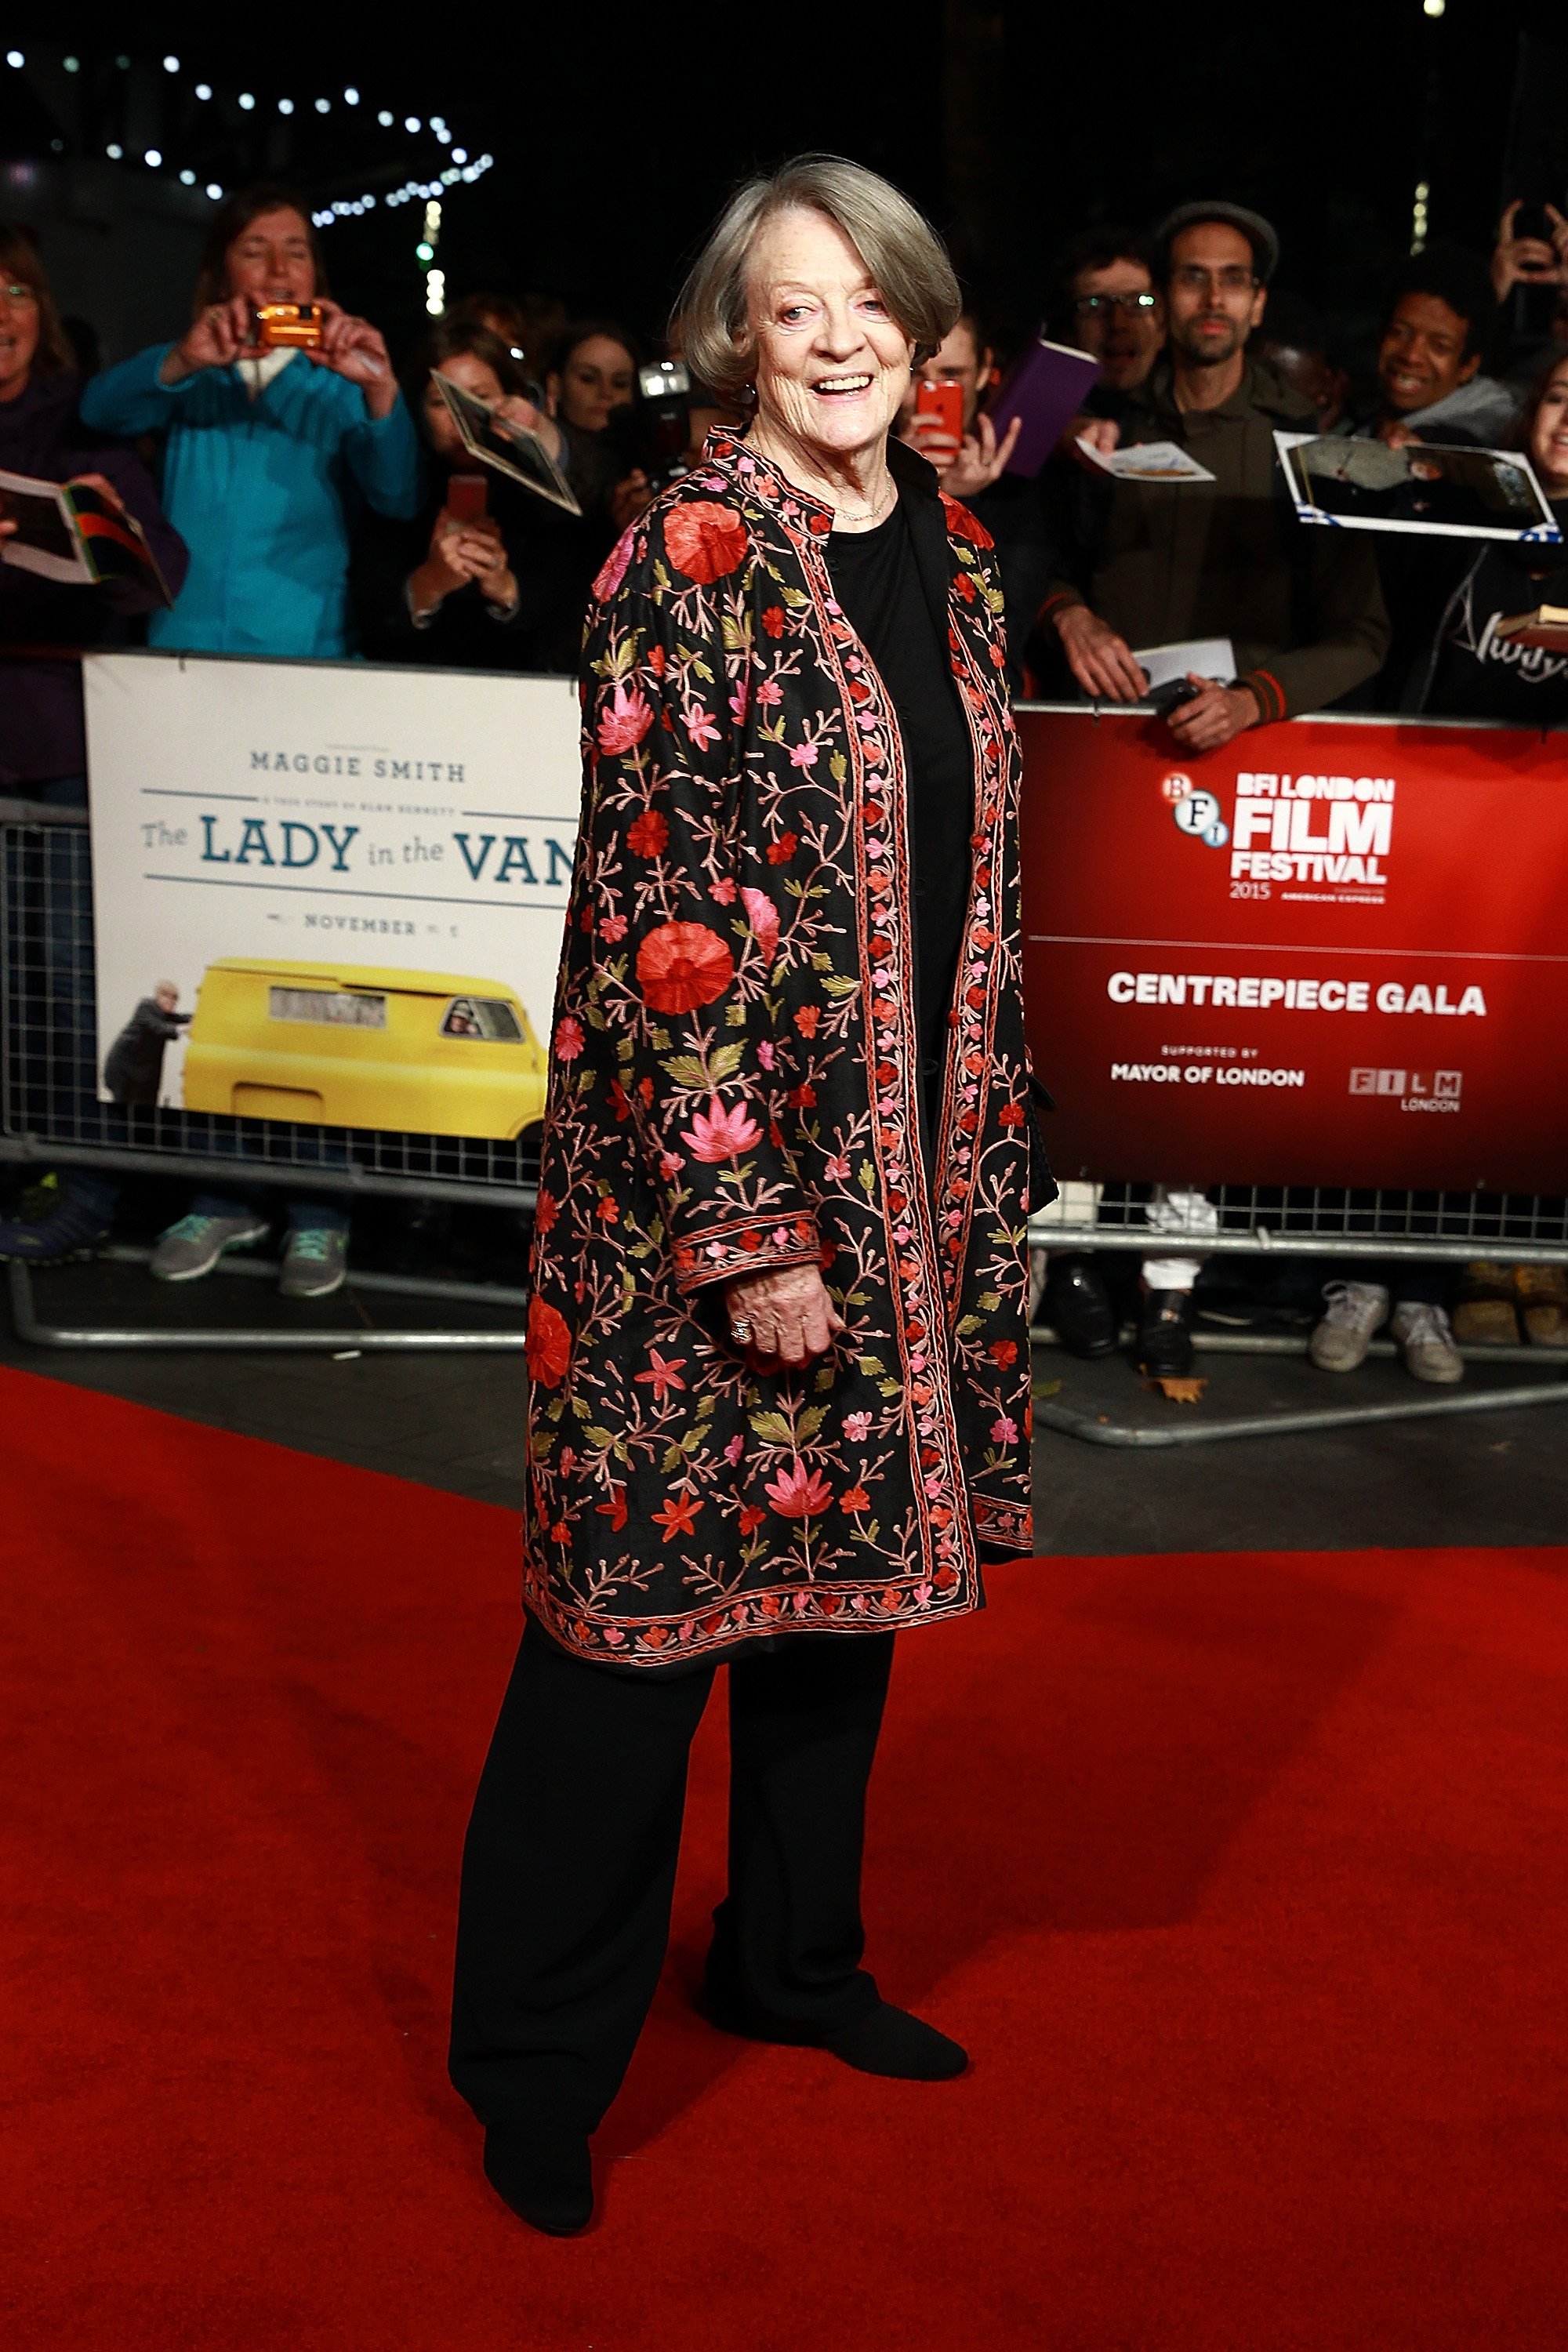 Maggie Smith at a screening of "The Lady in The Van" during the BFI London Film Festival at Odeon Leicester Square on October 13, 2015 | Source: Getty Images